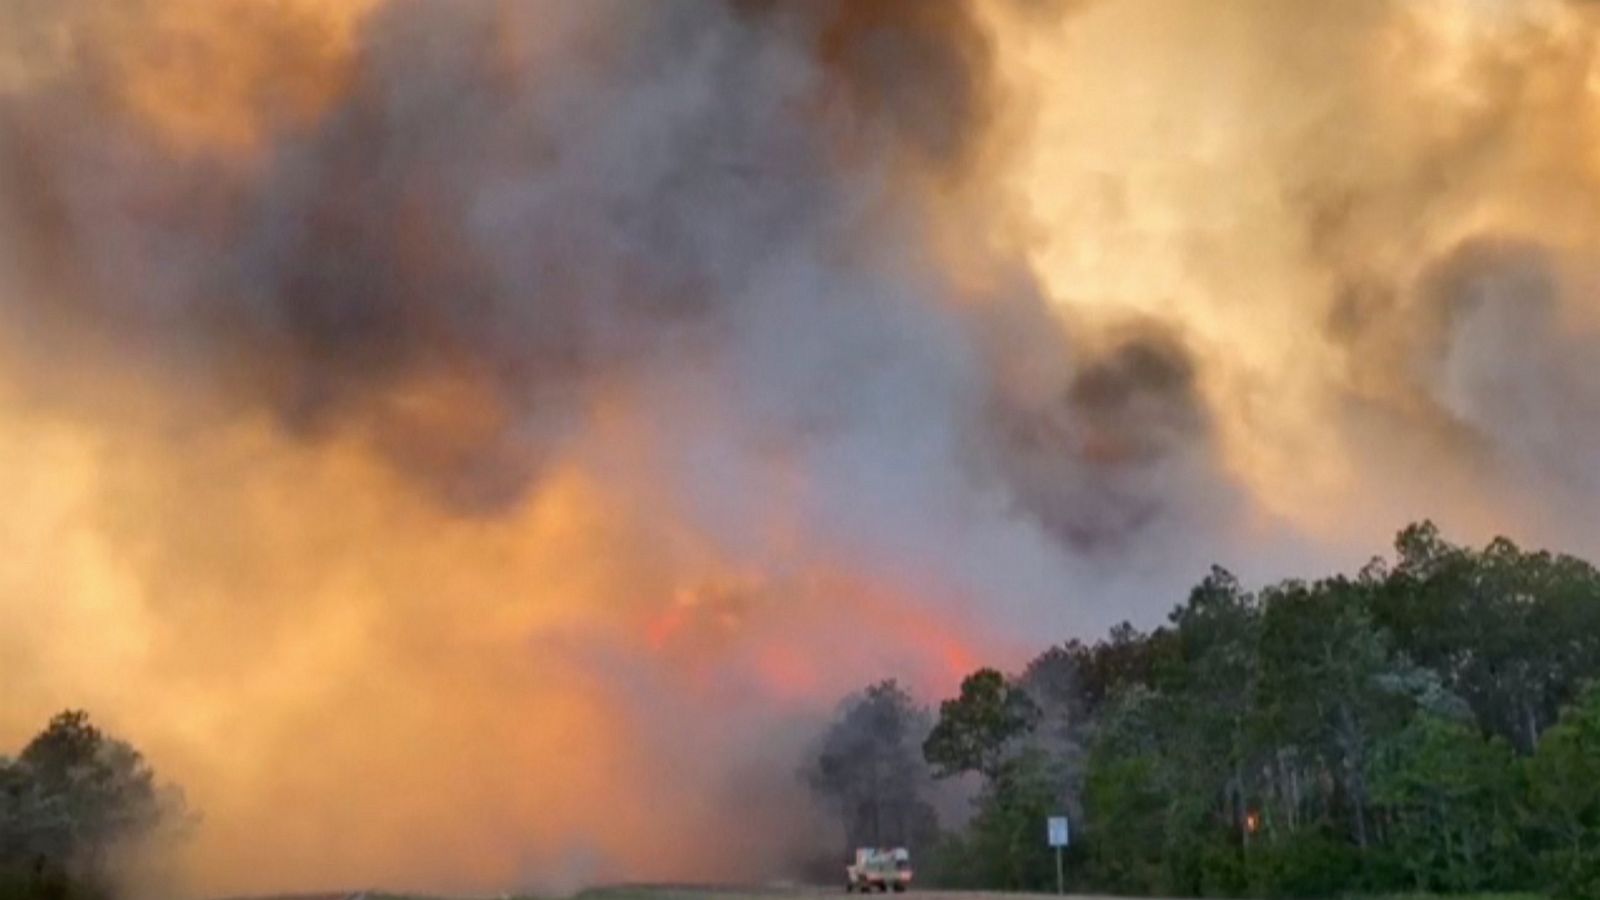 Forest fire continues to burn in Florida after threatening homes